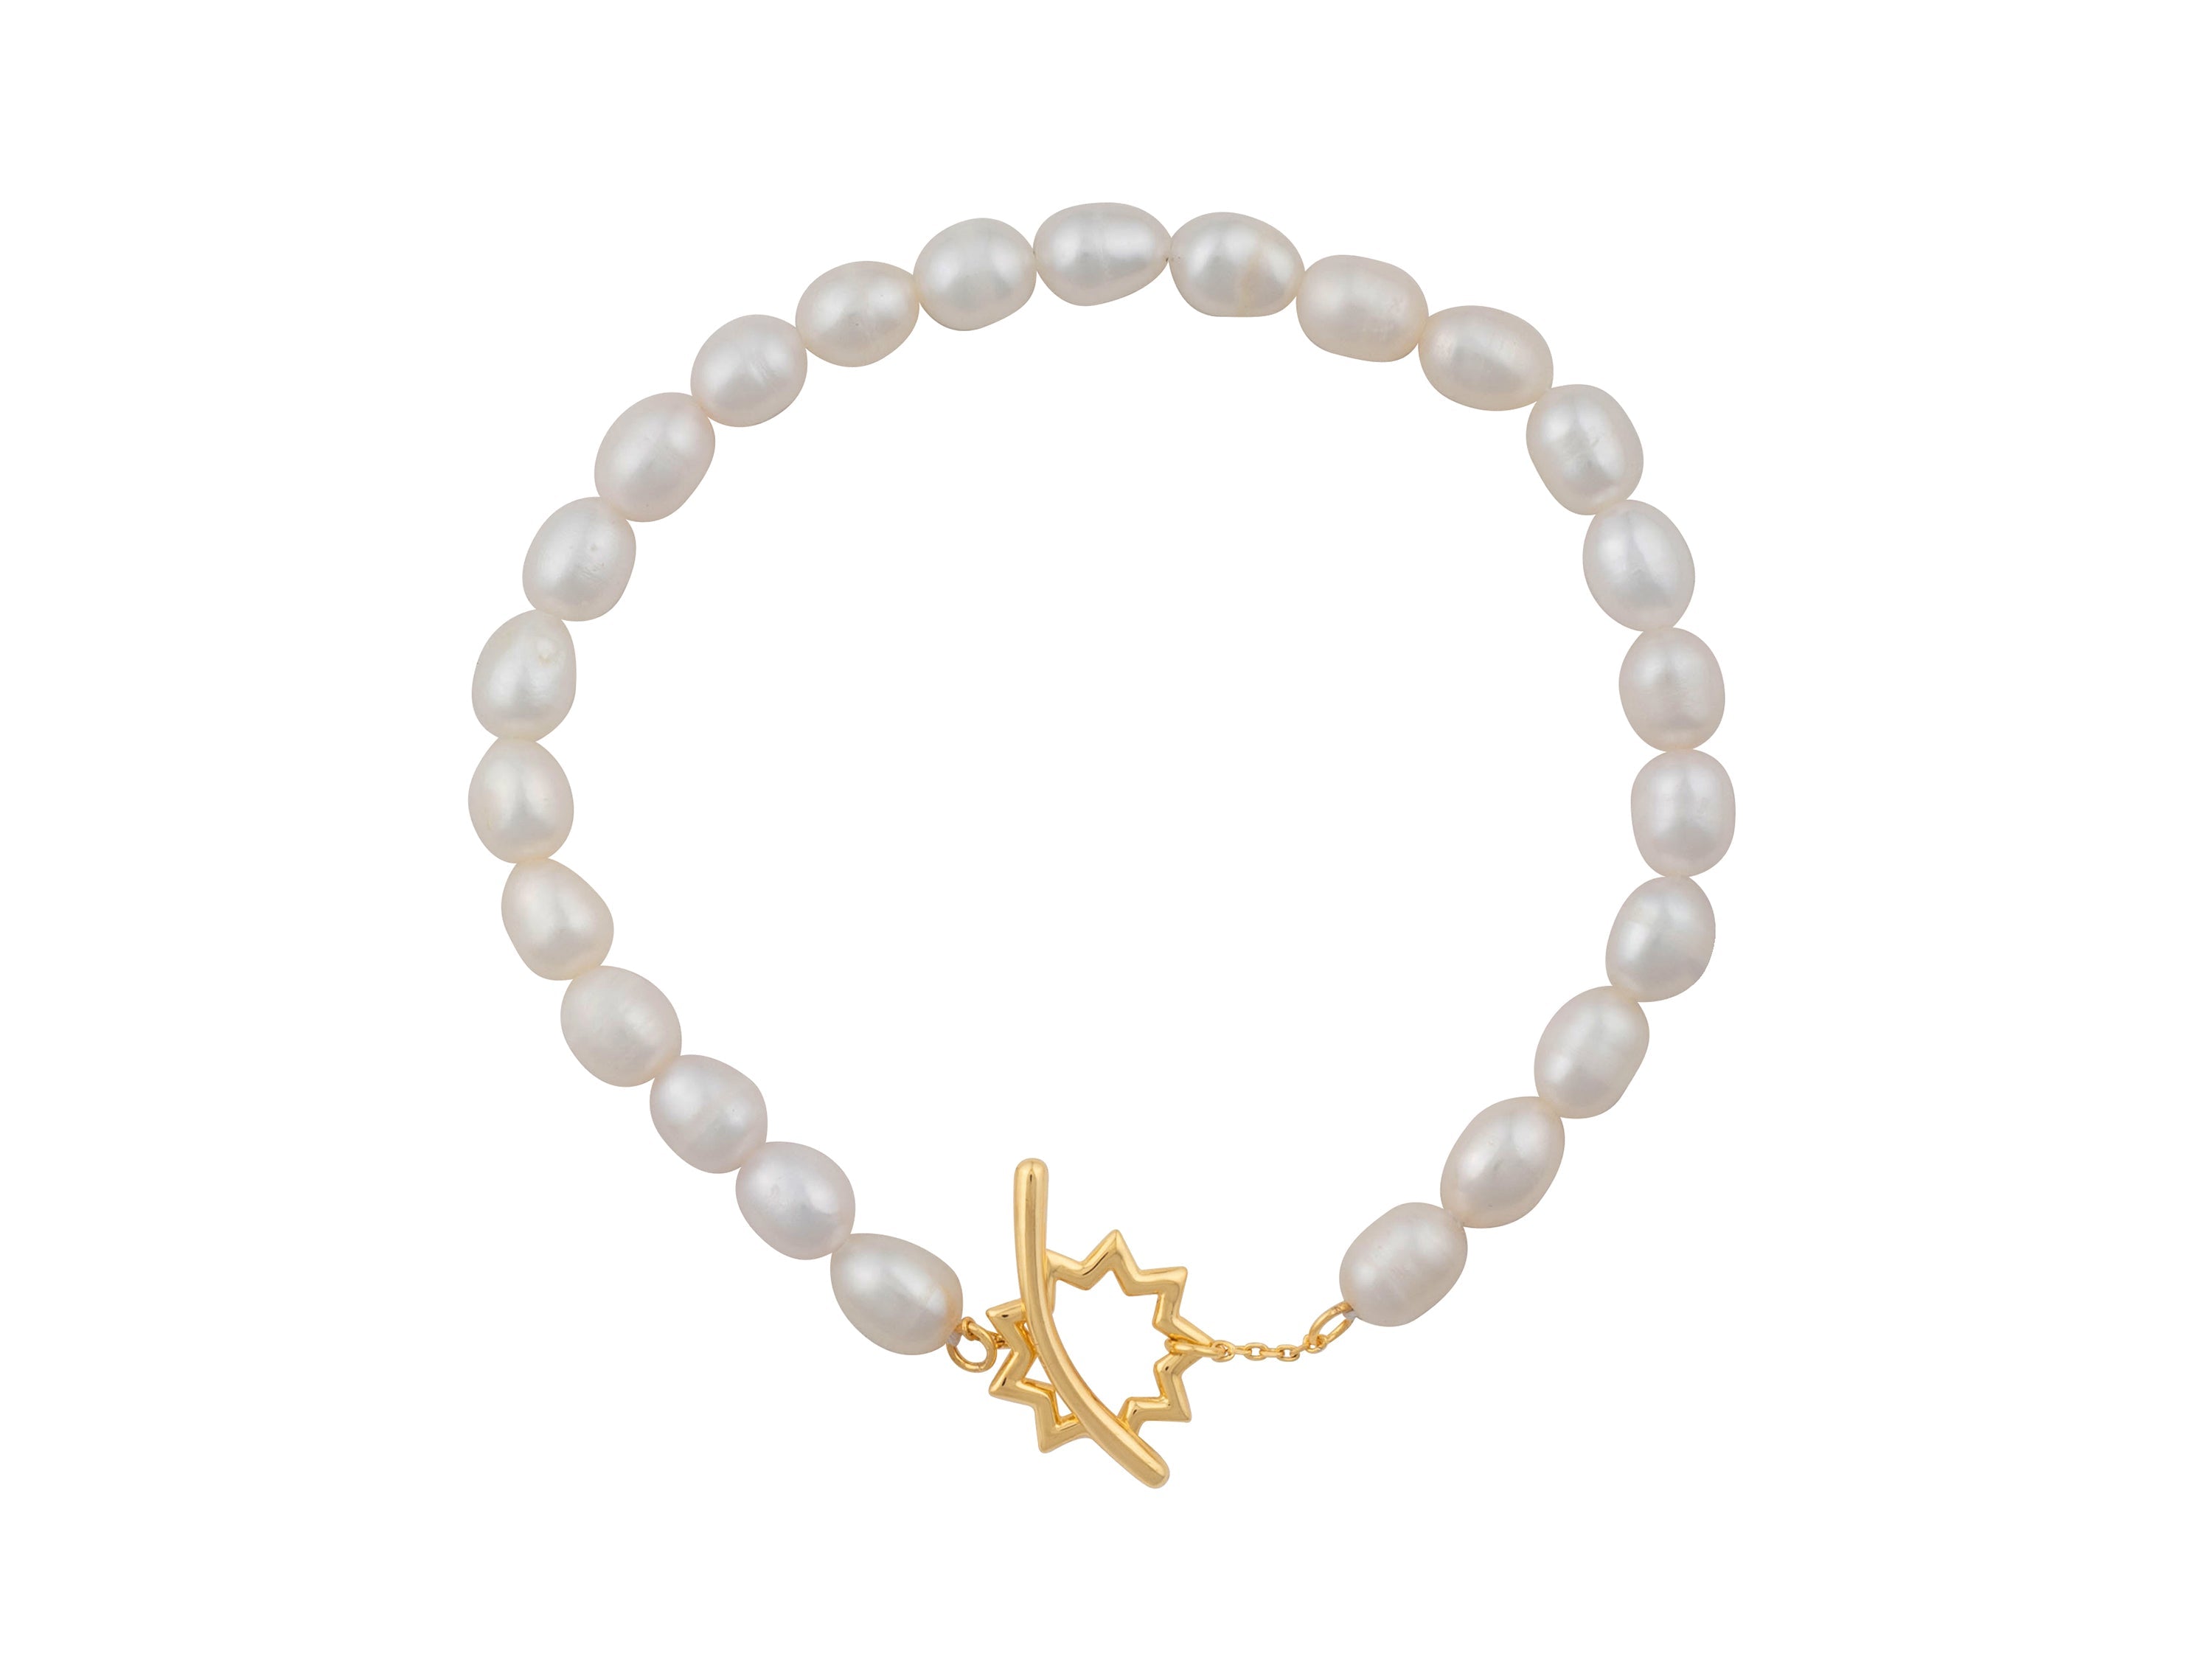 Bahai nine star outline gold toggle clasp on oval freshwater pearl bracelet